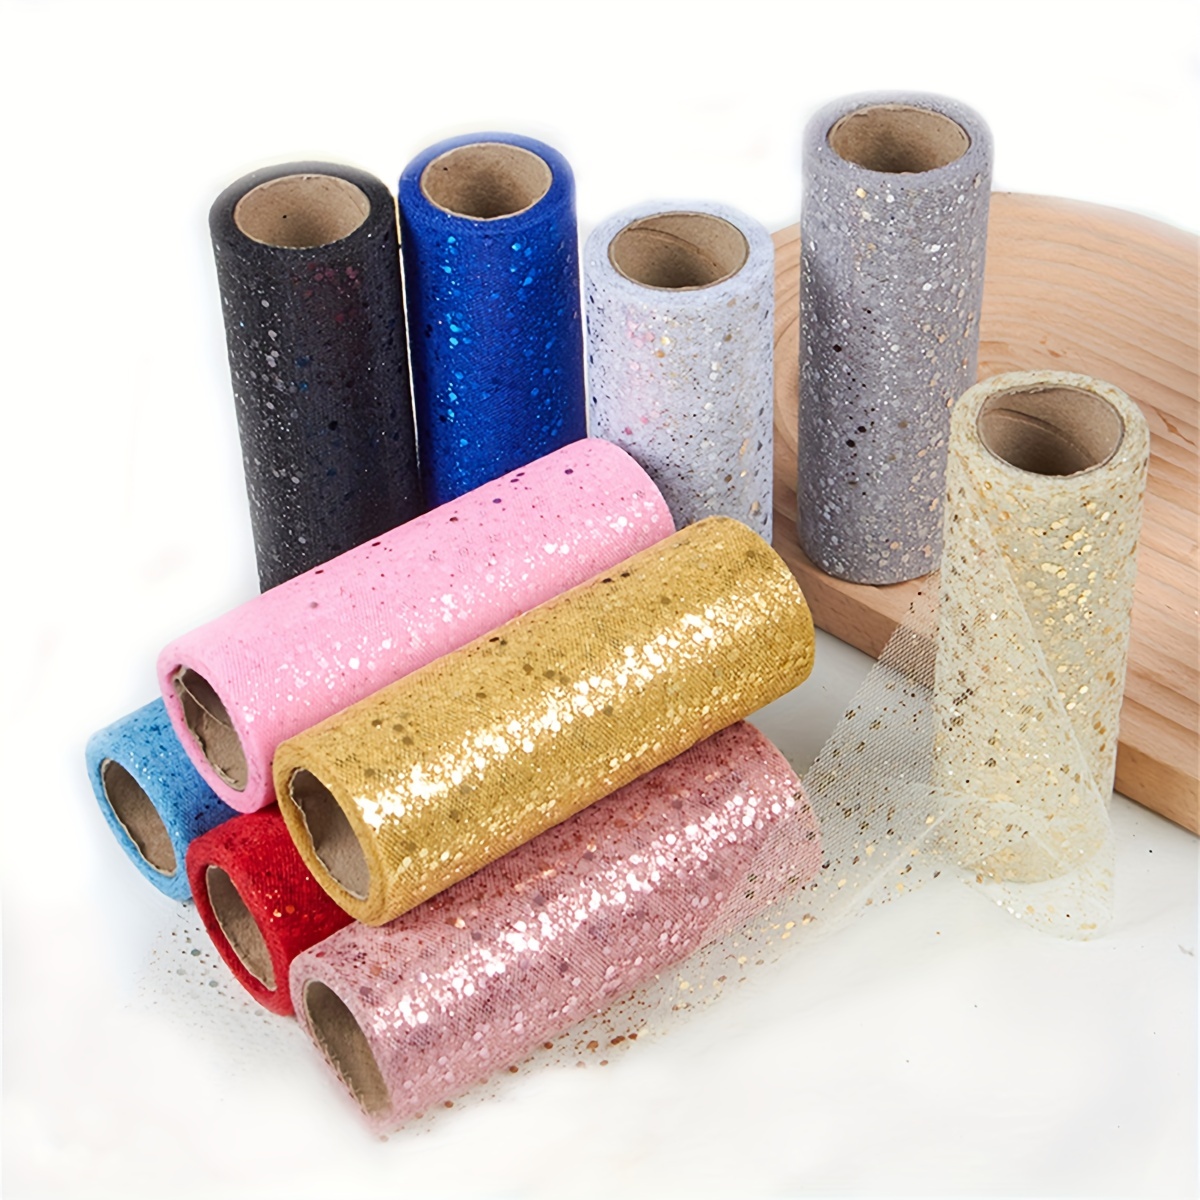 Tulle, Sparkling Tulle In 6 Rolls